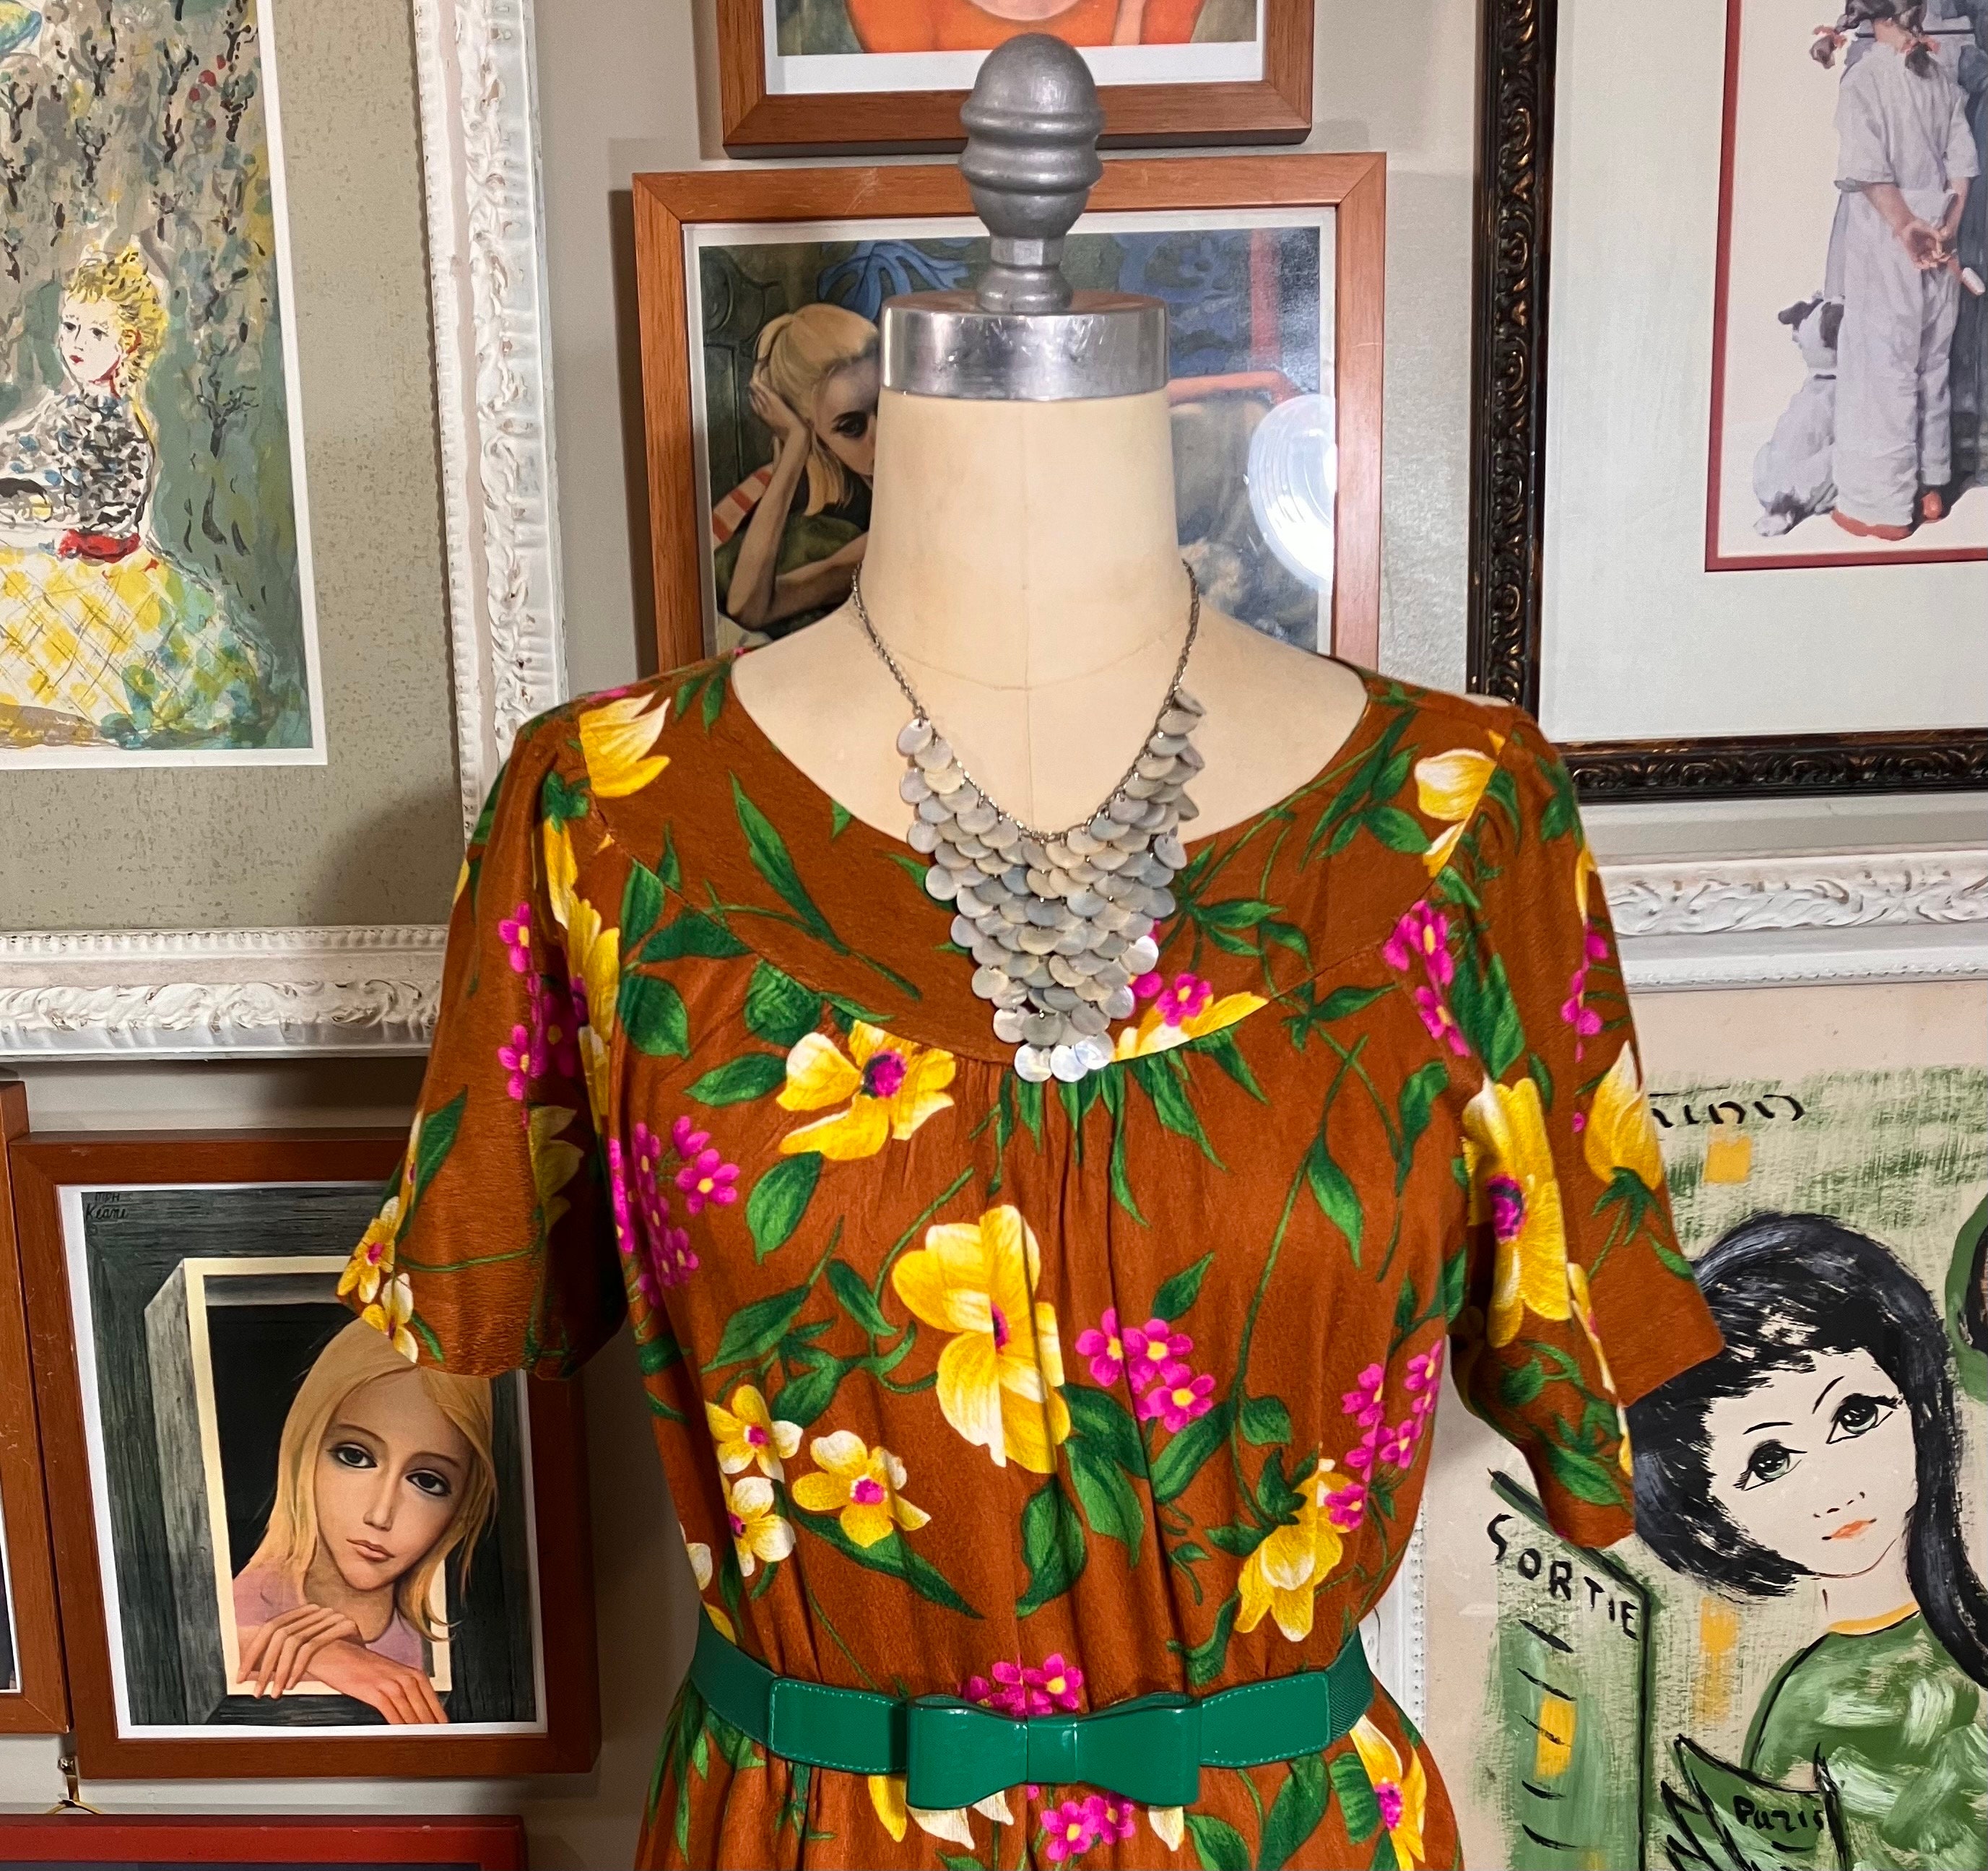 60s -70s Jewelry – Necklaces, Earrings, Rings, Bracelets 1960s Hawaiian Floral Print Shift Maxi Dress $69.00 AT vintagedancer.com